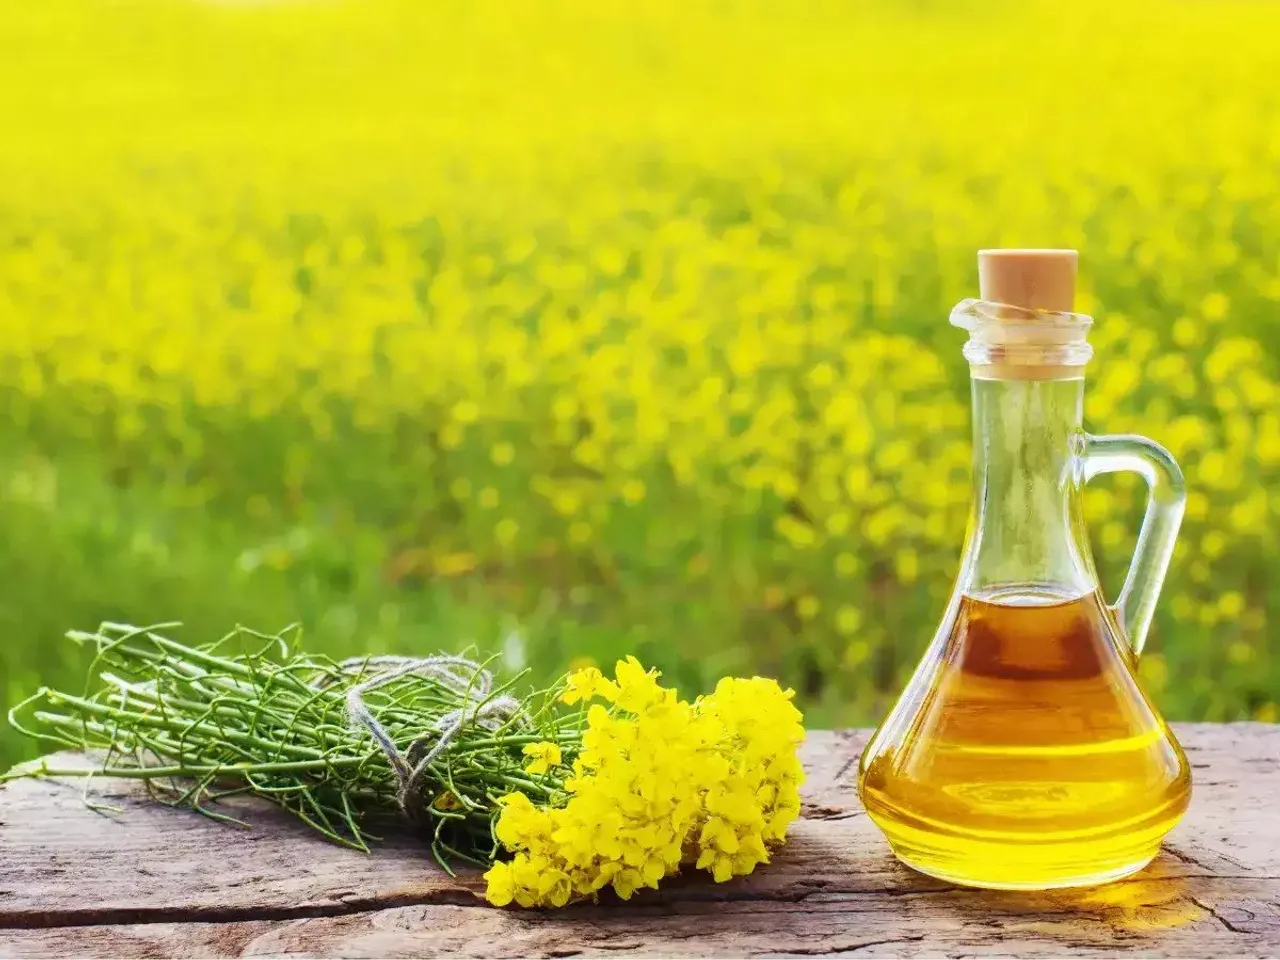 Himachal govt to give mustard oil at Rs 110 per litre under public distribution system